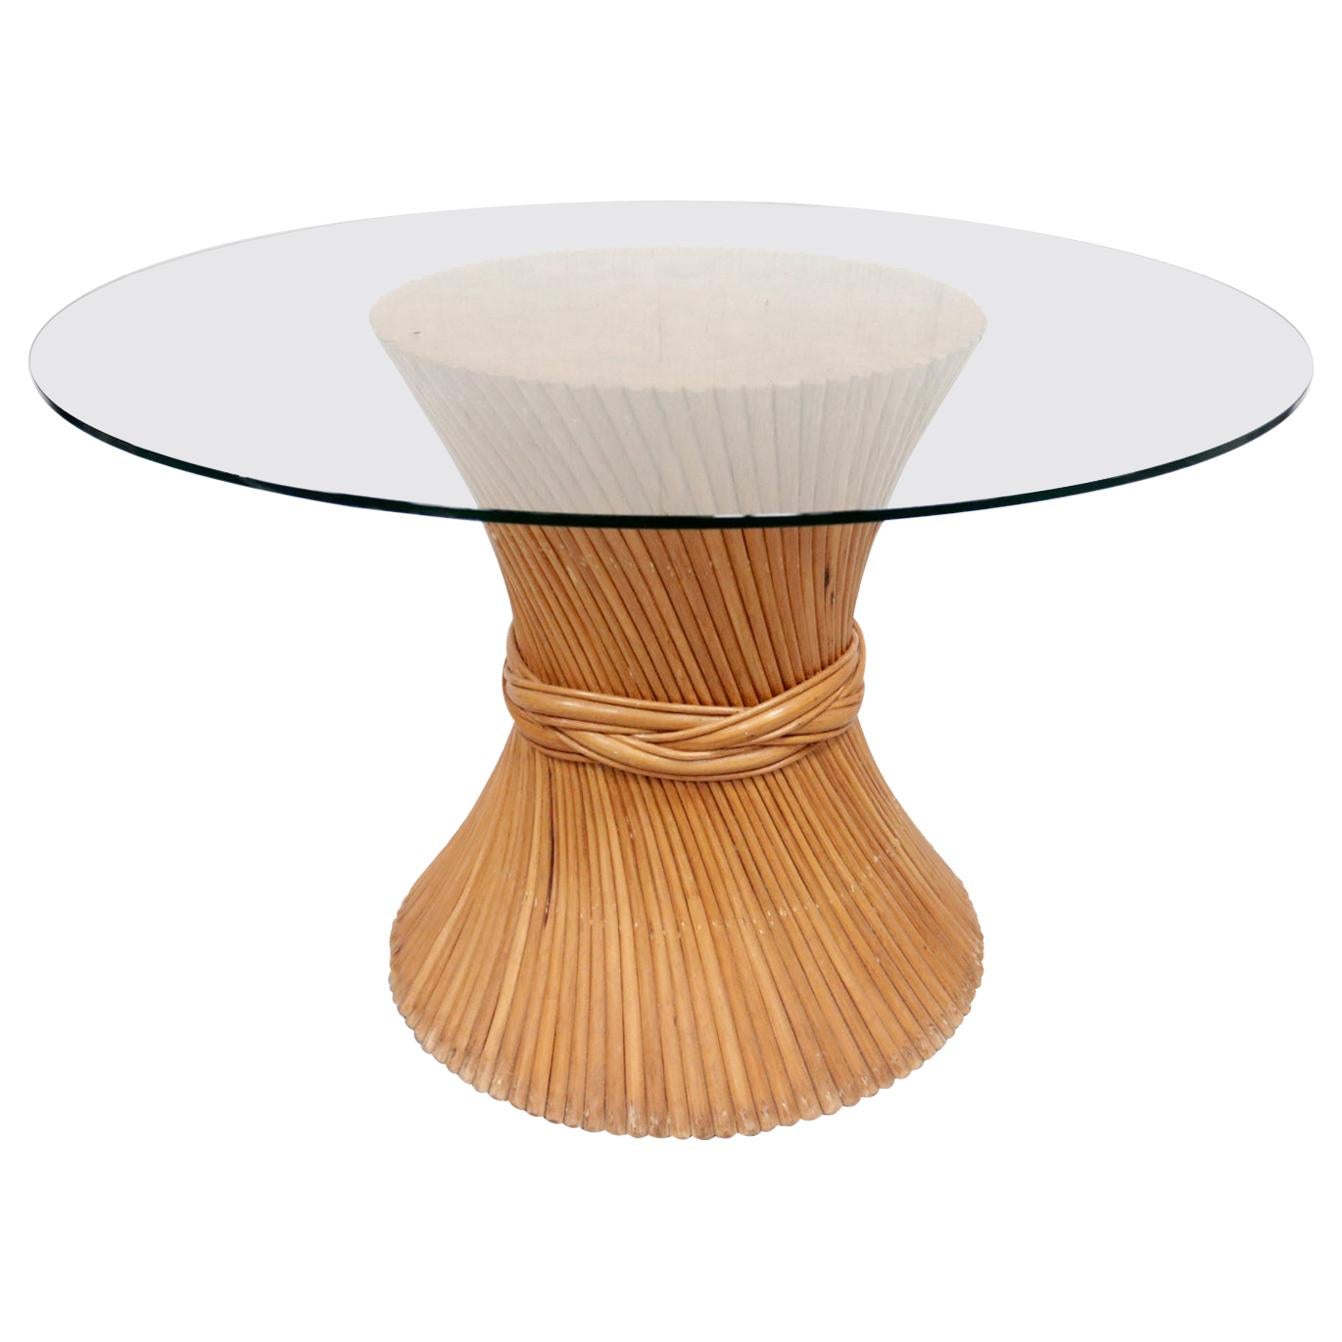 Hollywood Regency Wheat Sheaf Dining Table by McGuire